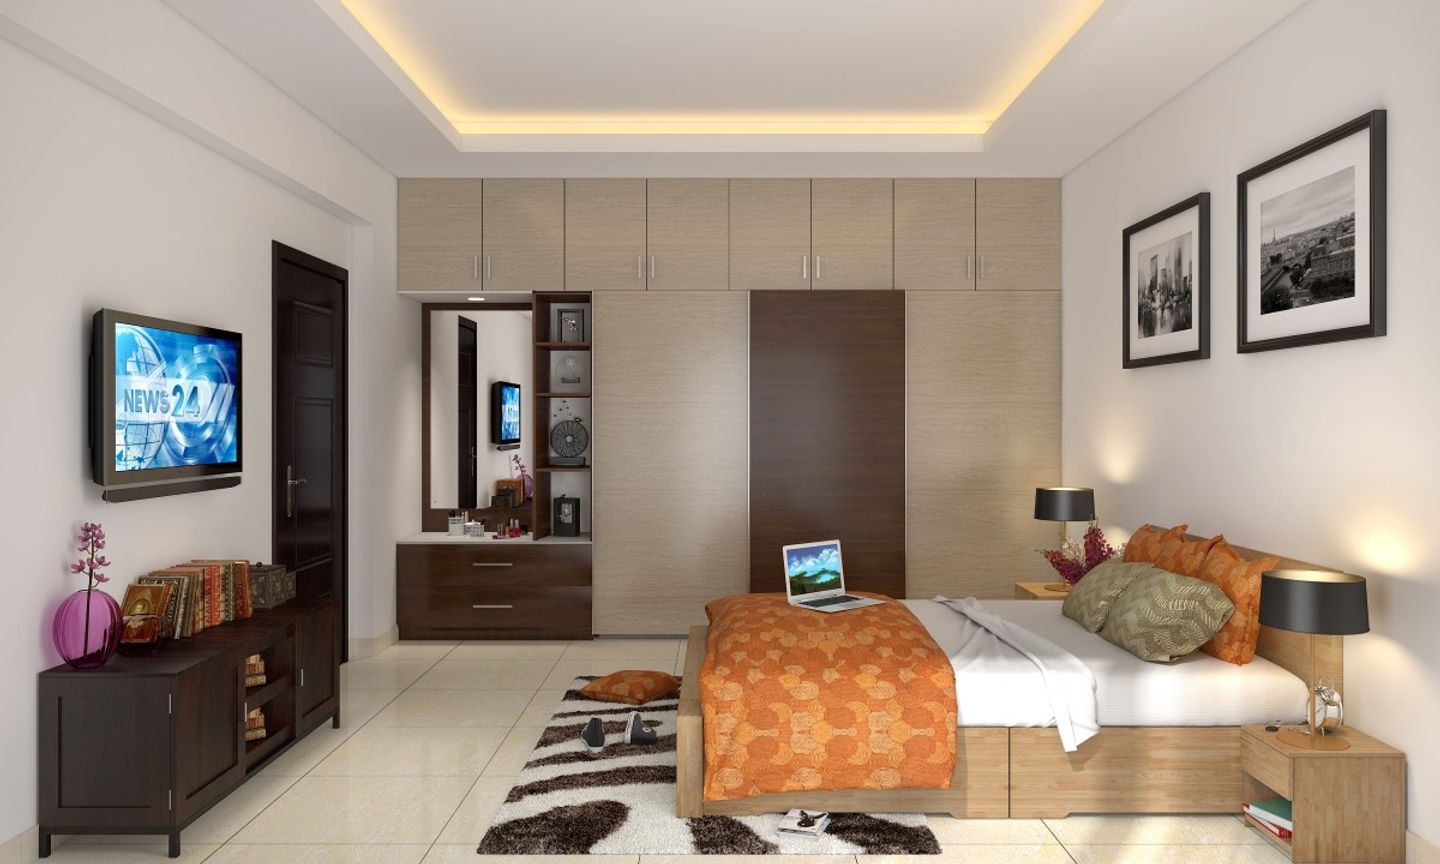 Contemporary Master Bedroom Design With White And Brown Interiors